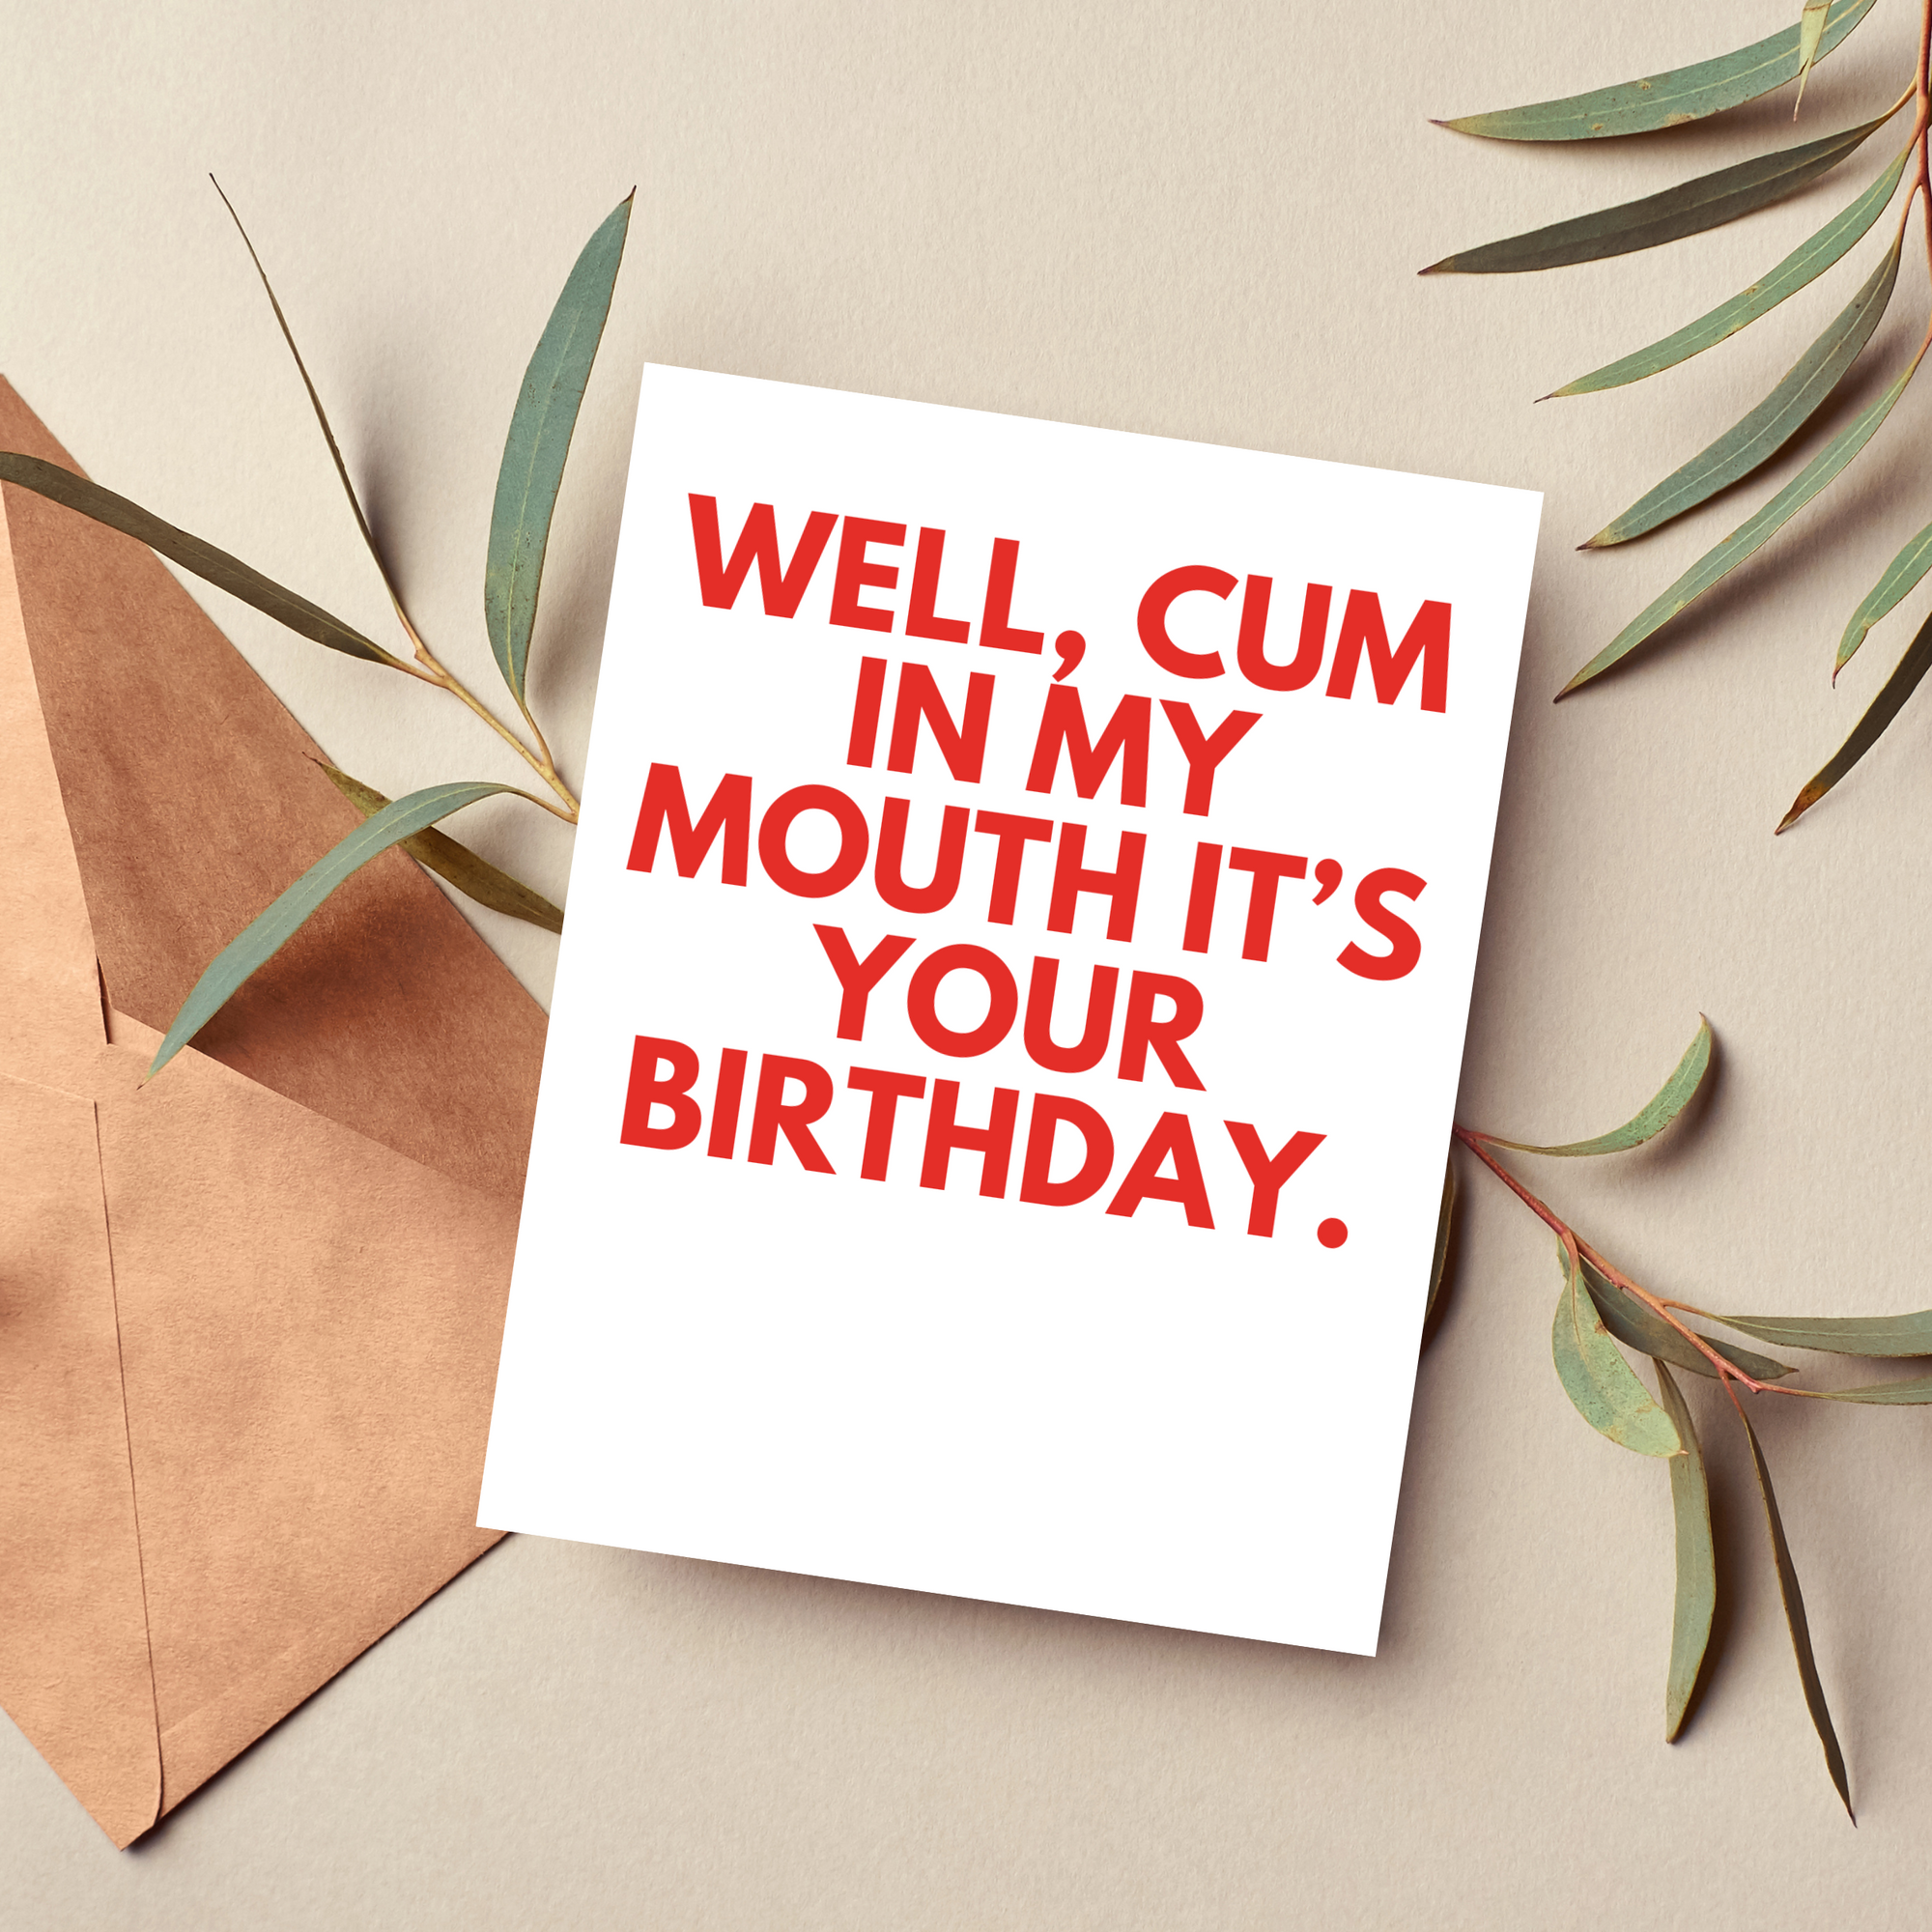 X-Rated Birthday Card for Him